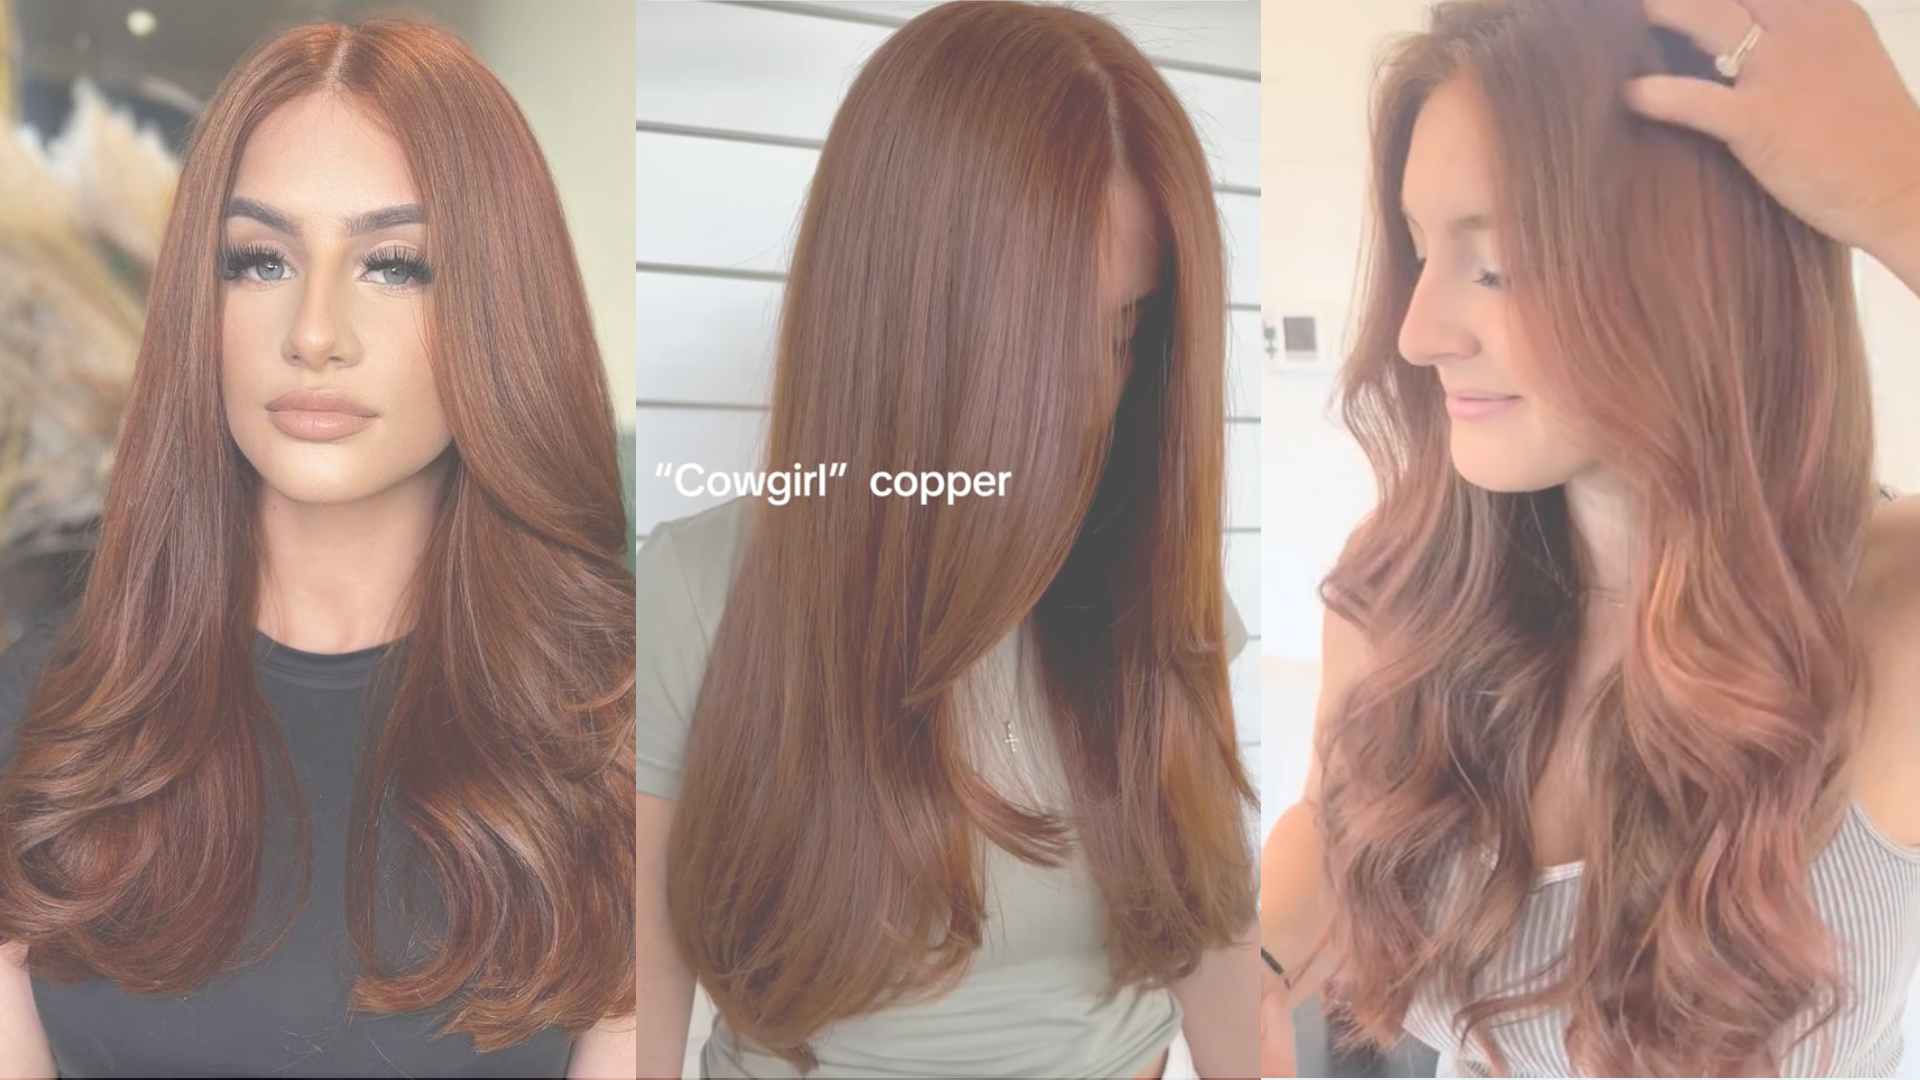 Cowgirl Copper: The Fall 2023 Hair Color for Redheads ‘By Choice’